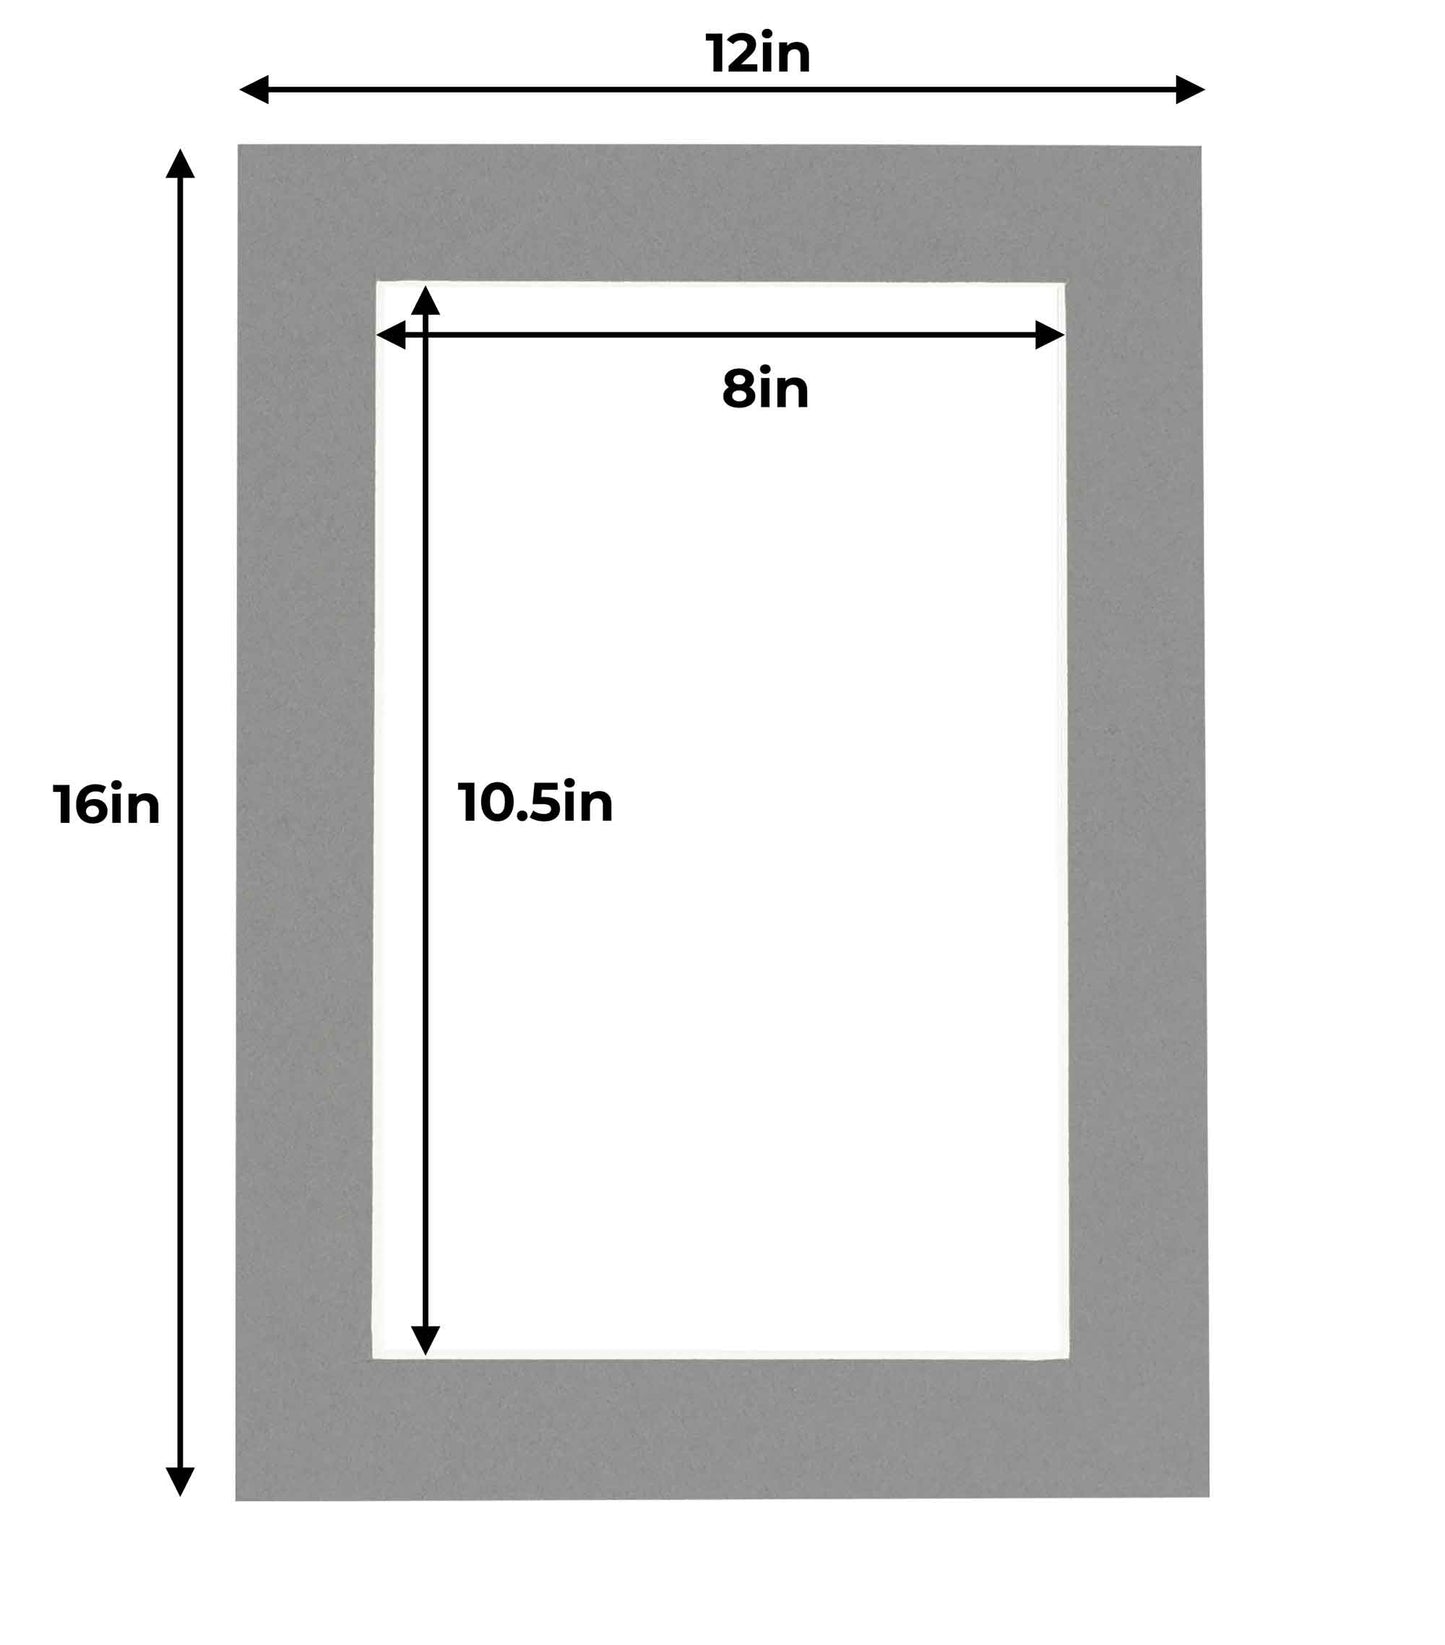 Pack of 10 Mid Grey Precut Acid-Free Matboard Set with Clear Bags & Backings